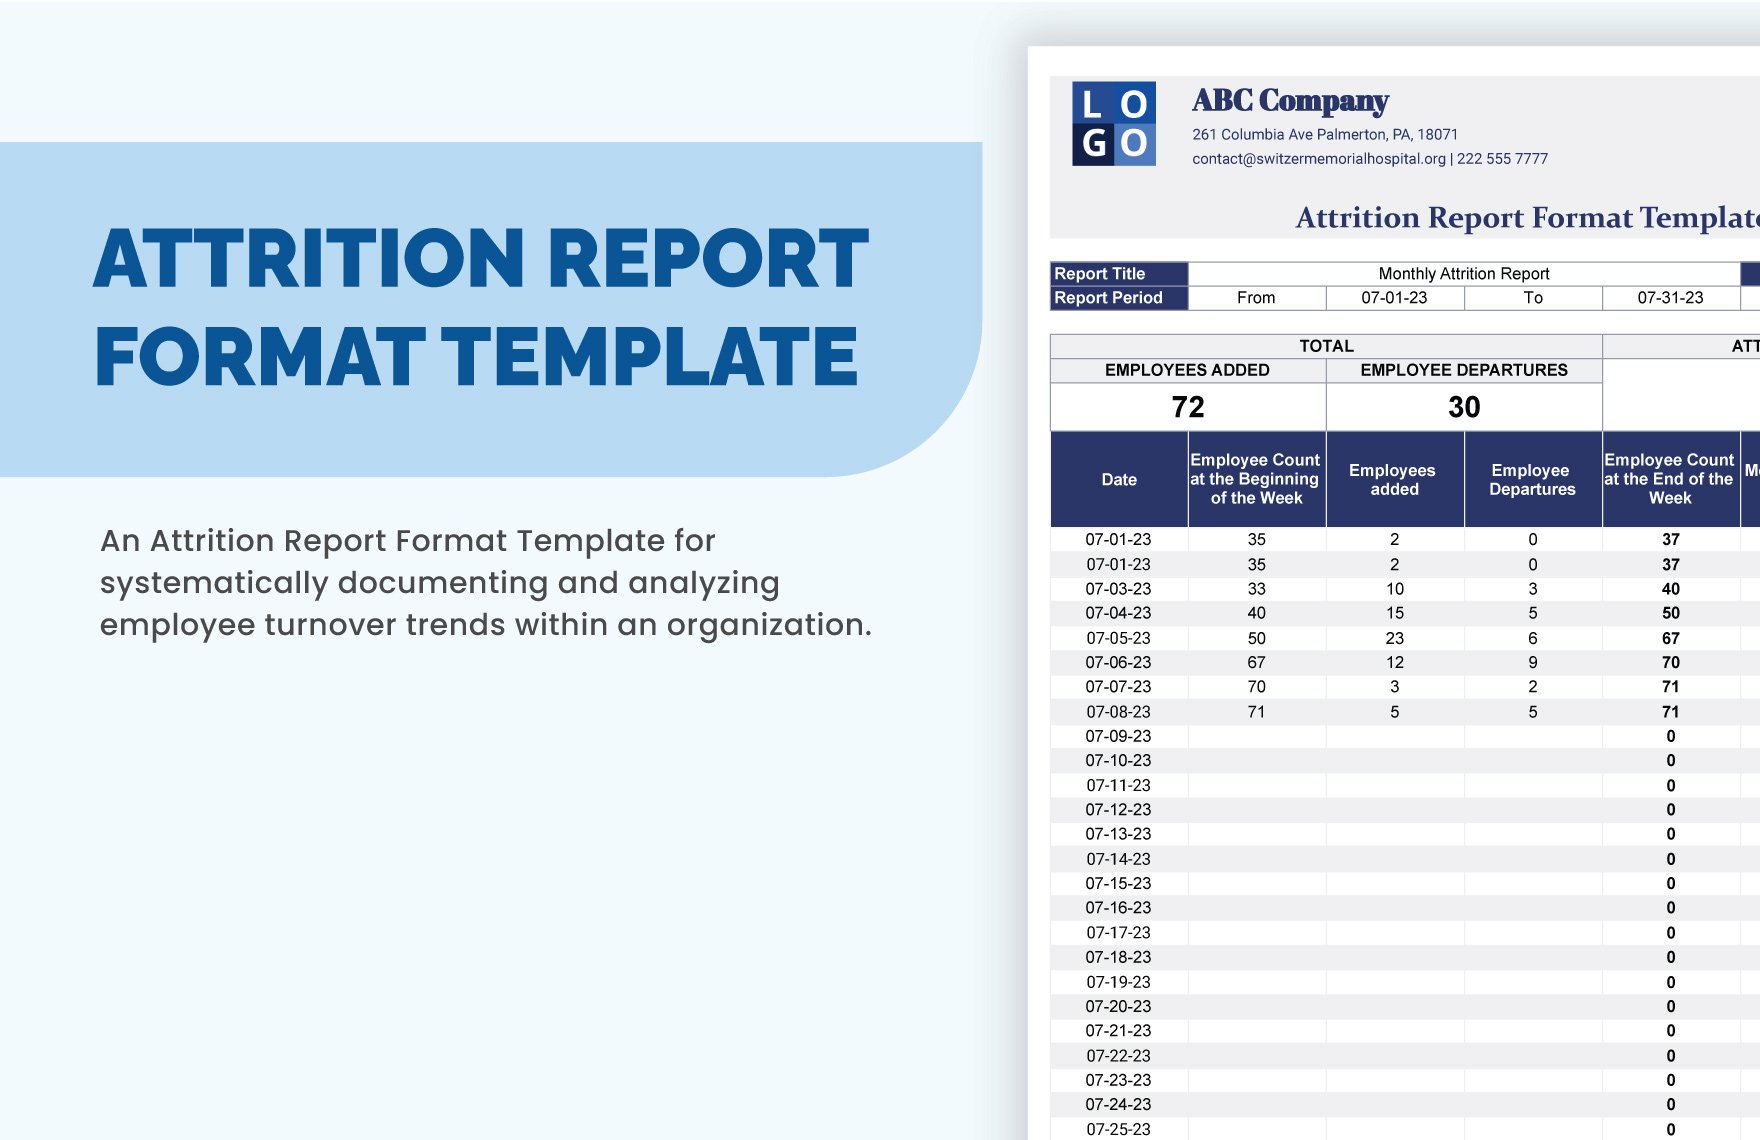 Attrition Report Format Template